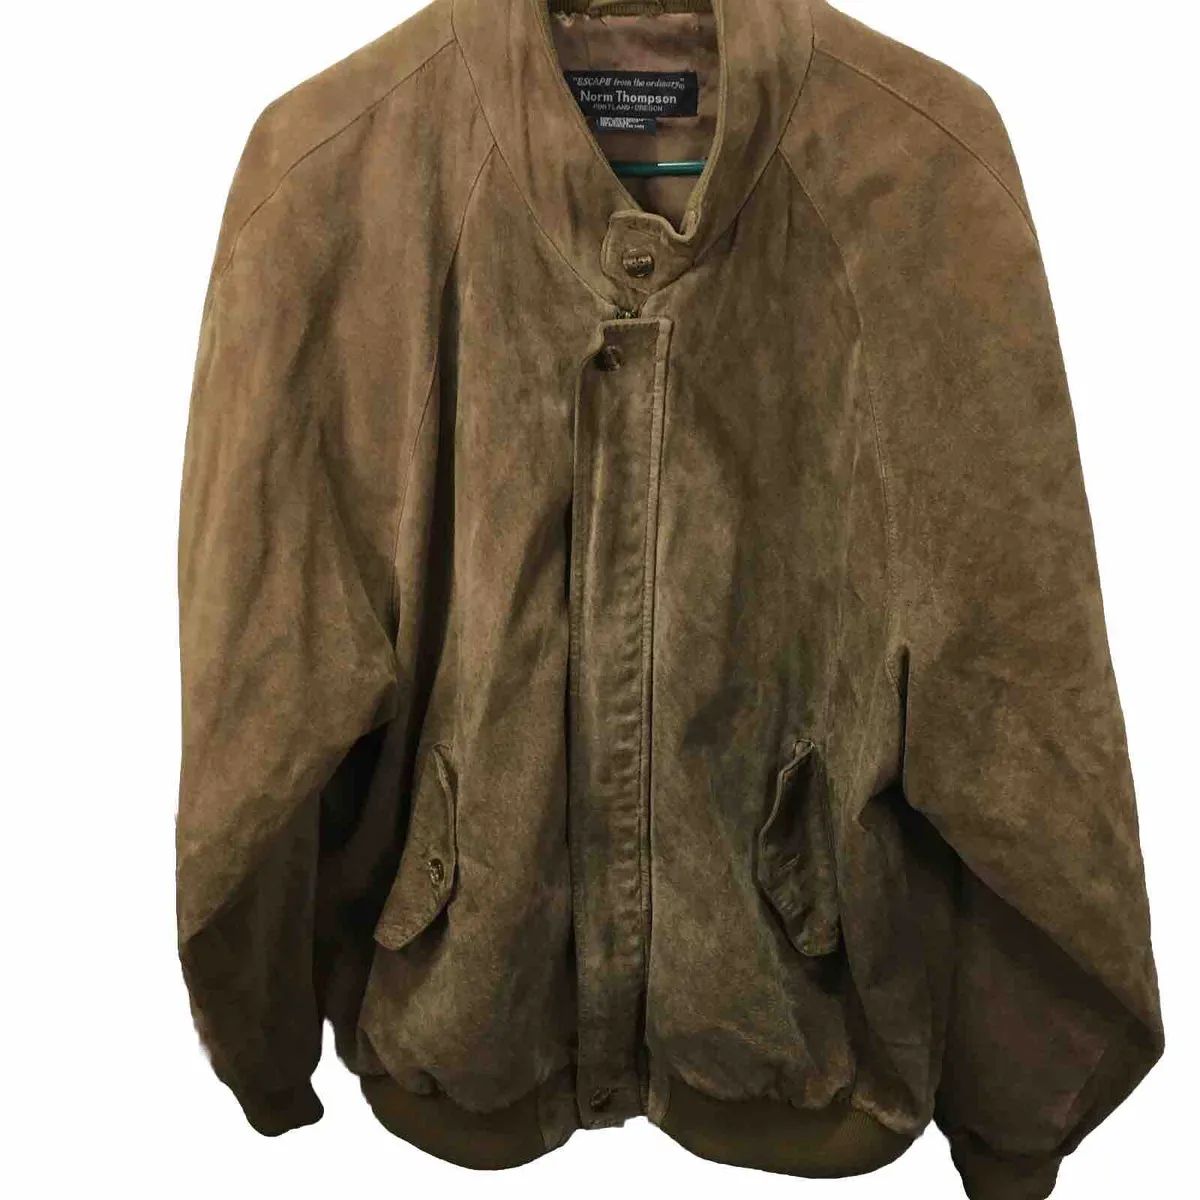 Norm Thompson Mens Brown Suede Leather Size T/XL Bomber Jacket | eBay US